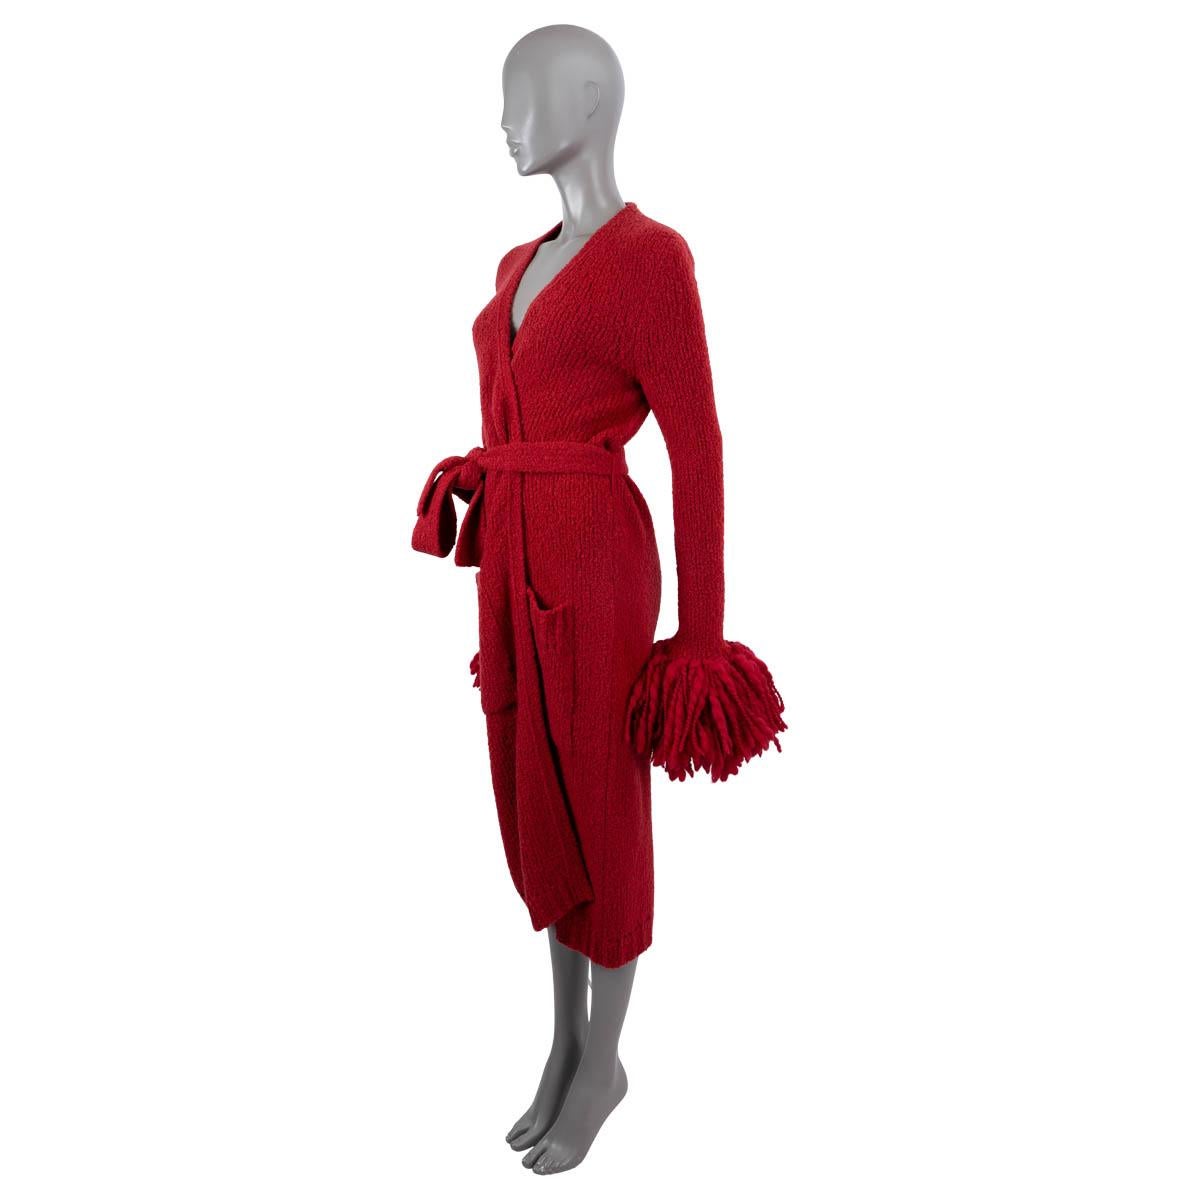 100% authentic Bottega Veneta 2018 belted long cardigan in red wool (88%) and polyamide (12%) with fringed mohair trim at the cuffs. Features two slit pockets on the front and is finished with ribbed trim at the hem and the pockets. Close with a